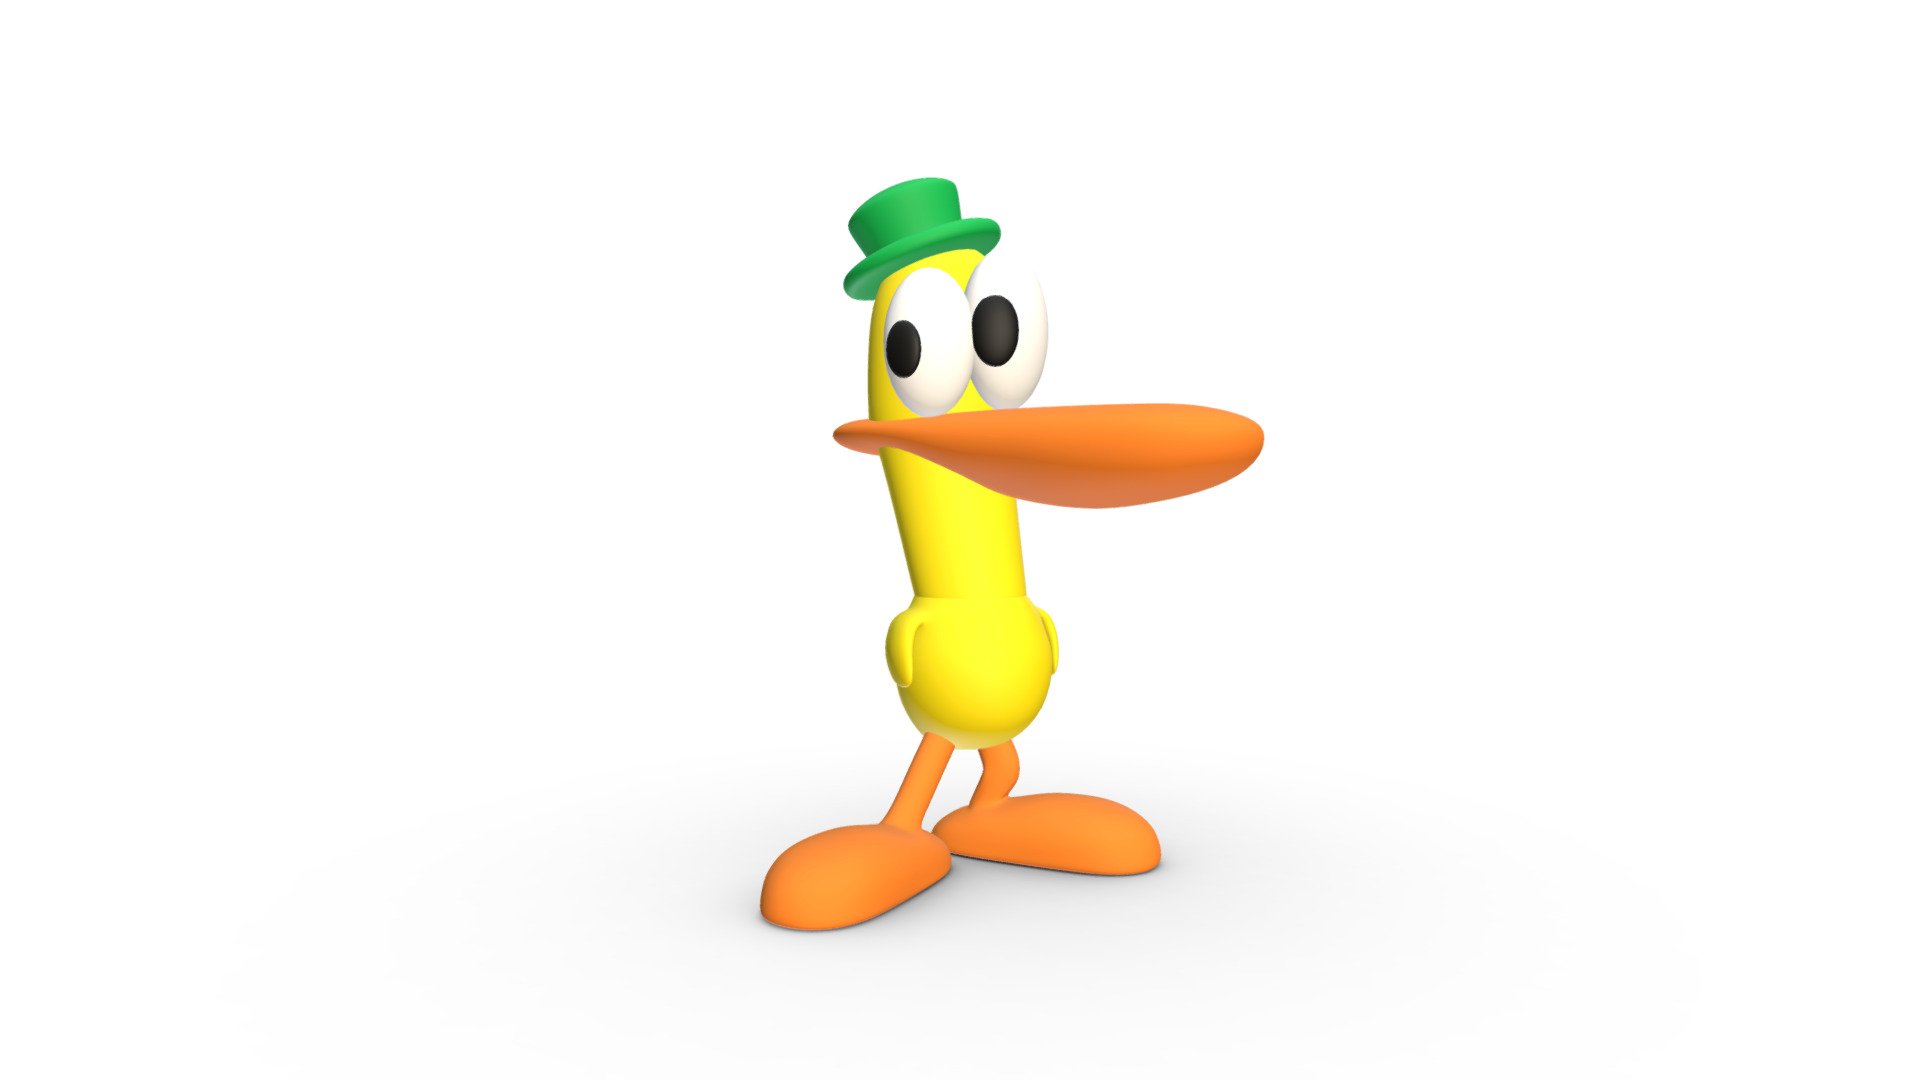 Pato, a friend of Pocoyo, from the Pocoyo cartoon series created in 2005 and originally modeled in Softimage. This is my personal version made in Blender 2.79 3d model